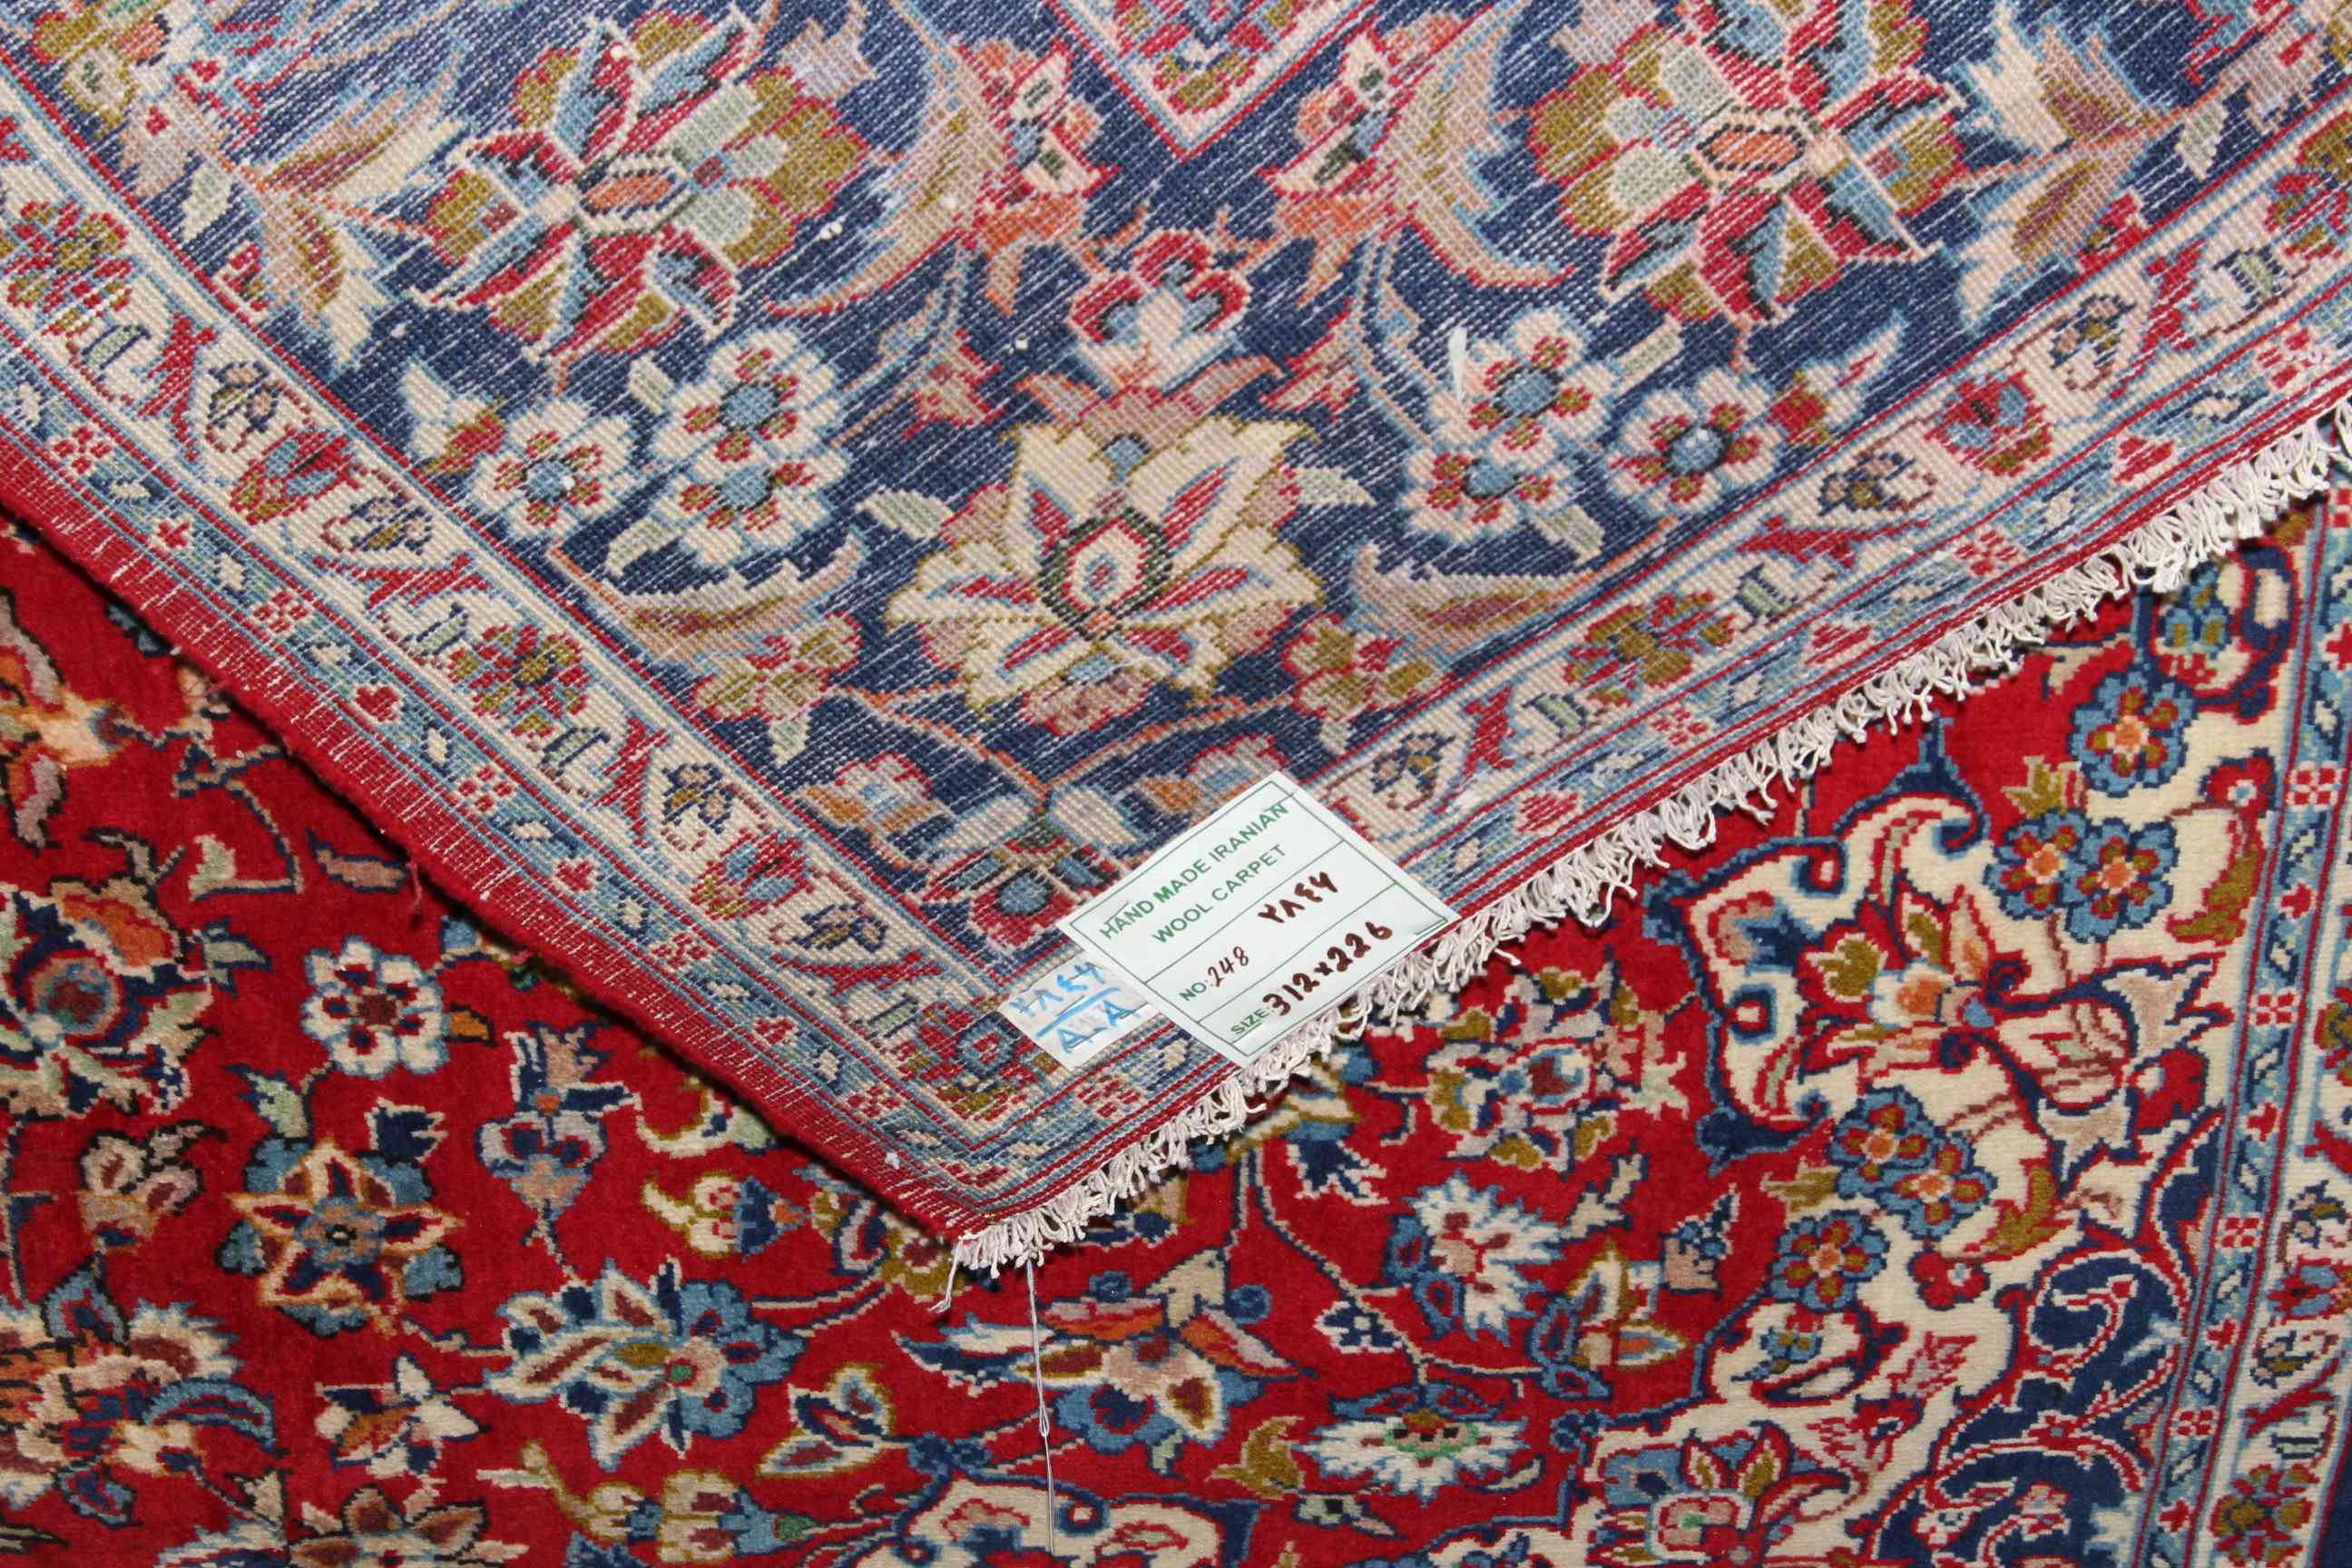 Fine hand knotted Isfahan carpet 3.12 x 2.26m. - Image 3 of 3